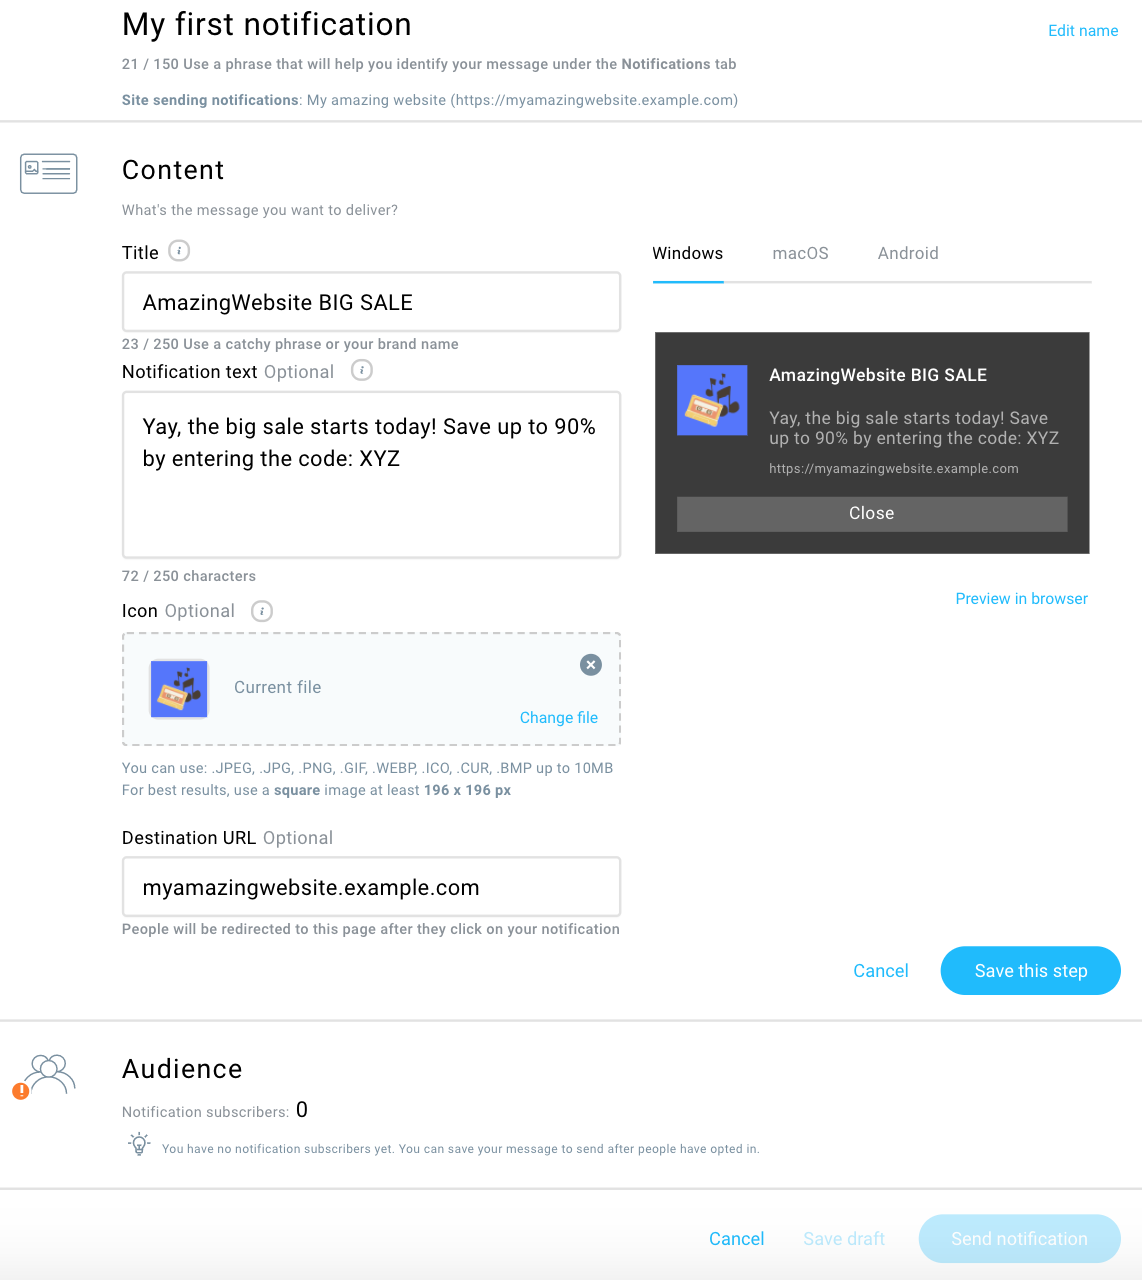 GetResponse's tool for creating custom notifications for separate campaigns 